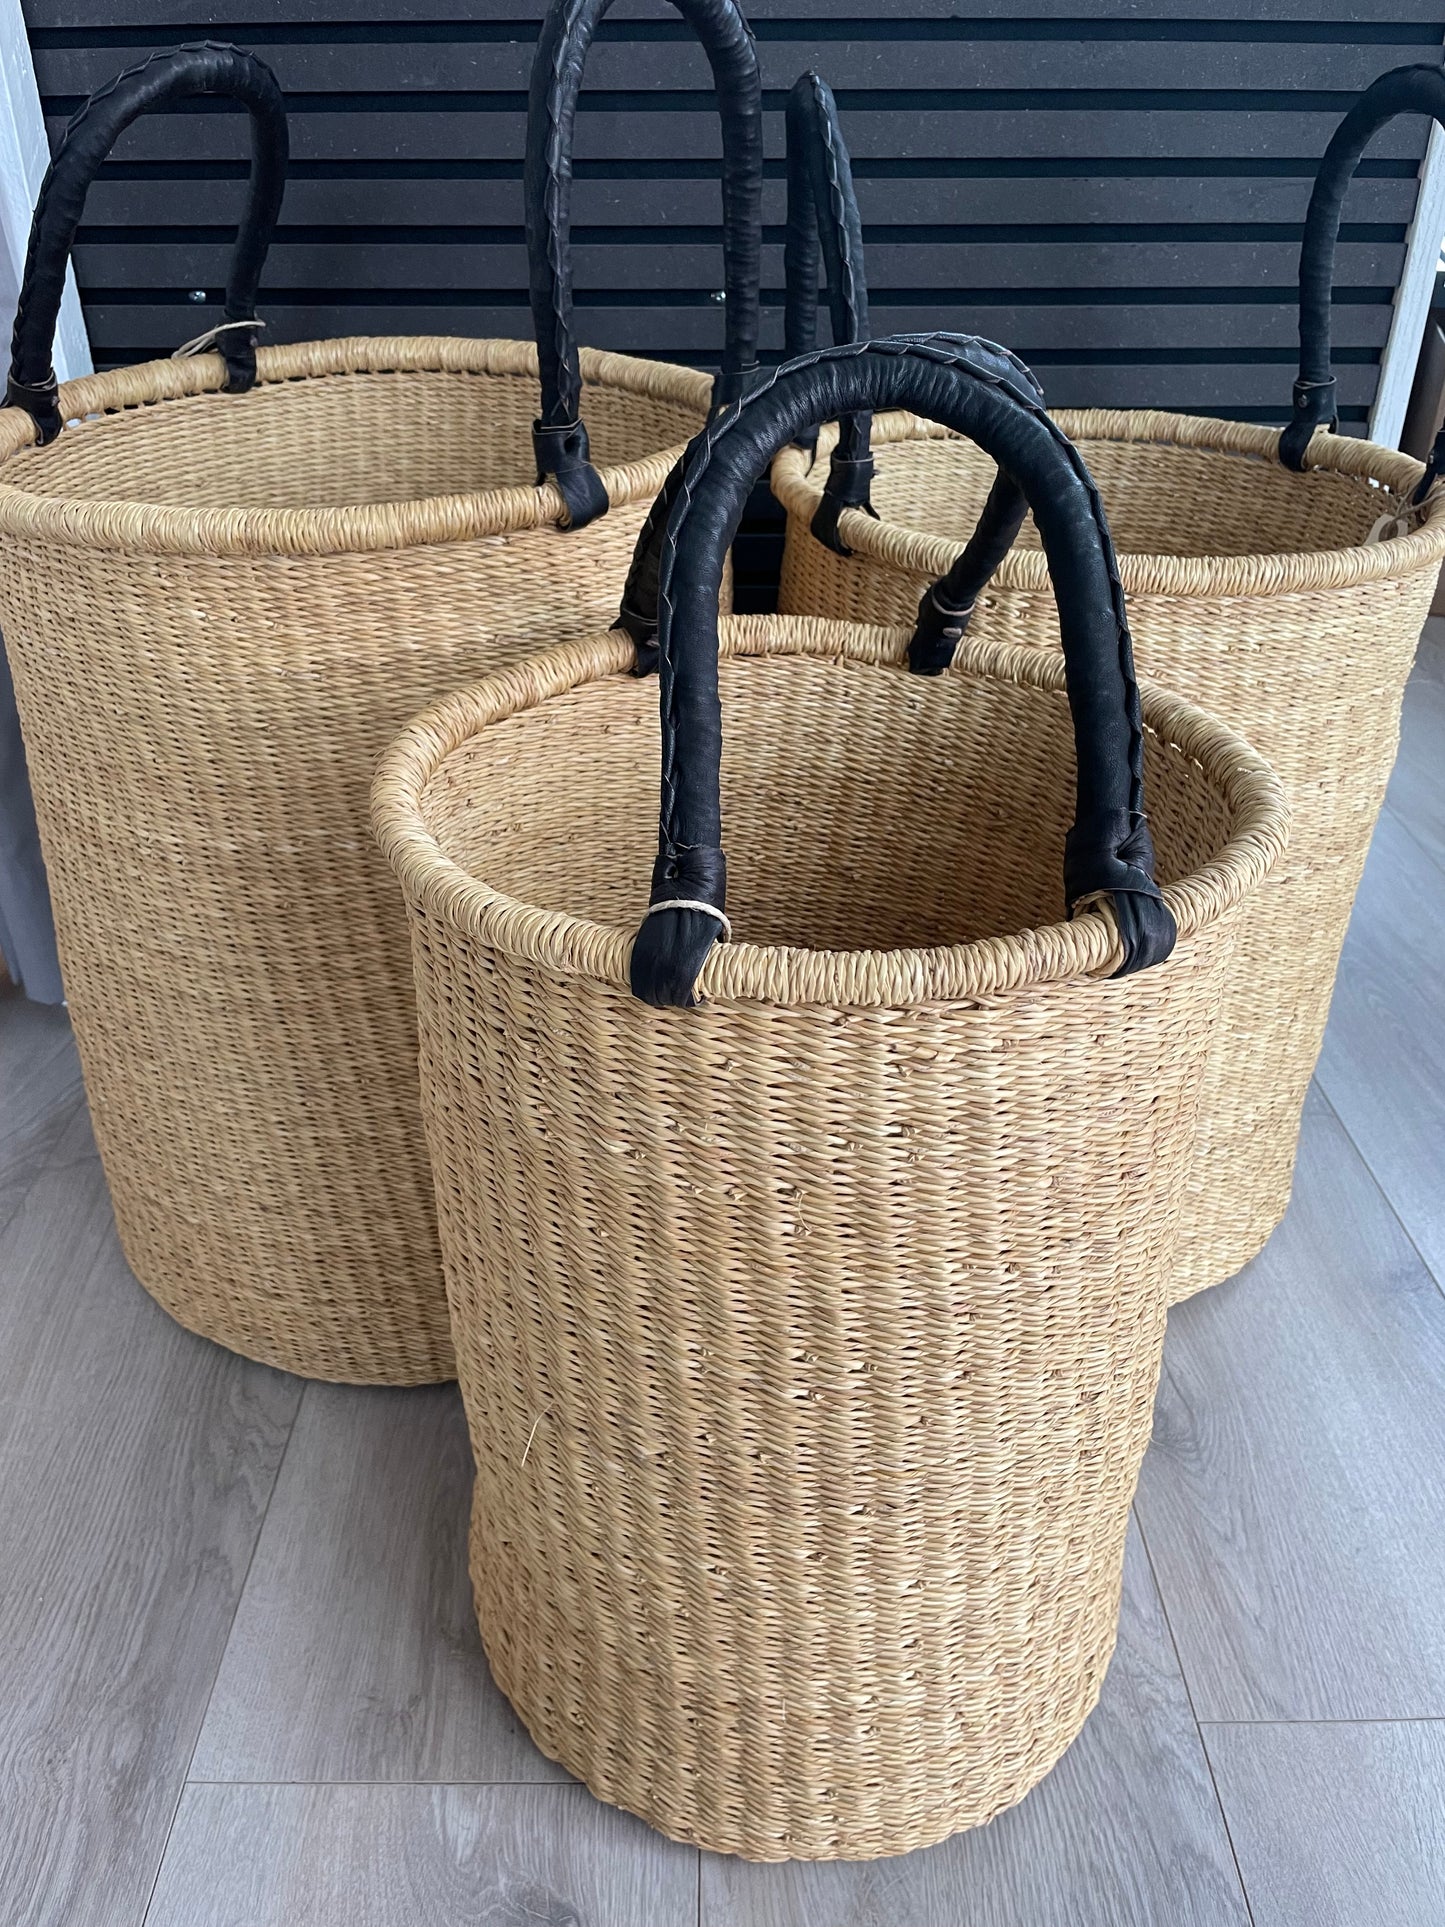 Laundry basket, natural with black leather handle